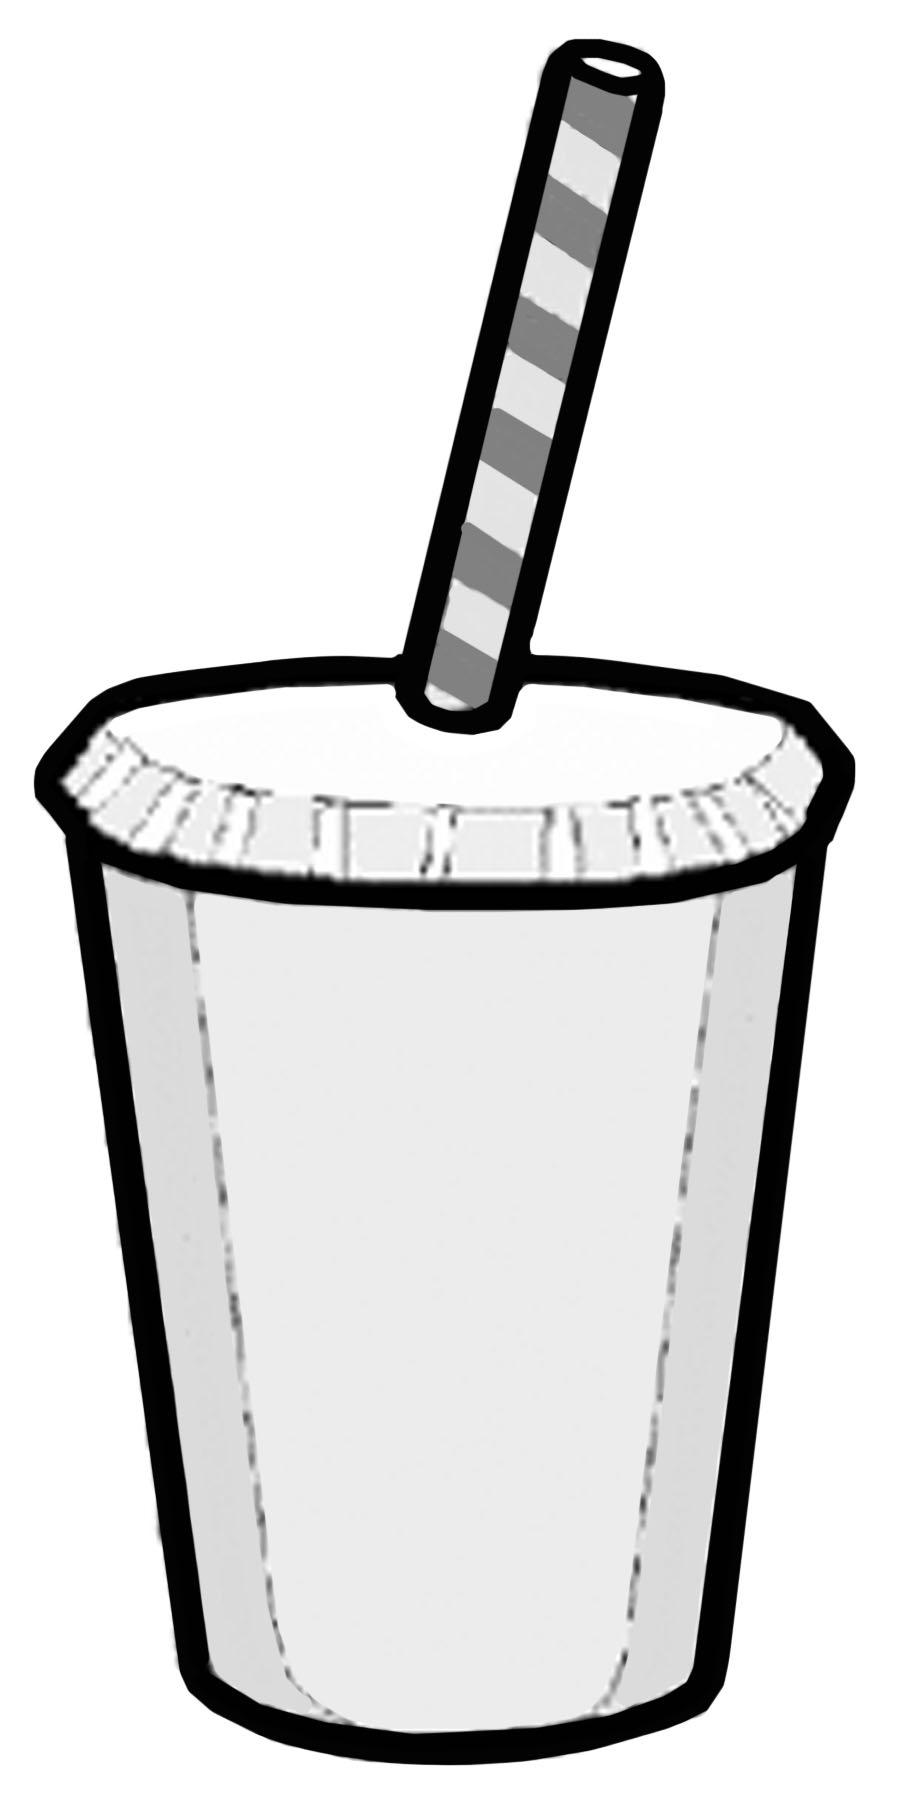 Marvin Stone Extra Activities Make your own drinking straw simulating Marvin s method. Share your model with the class. Make up an acrostic poem using the words DRINKING STRAW.